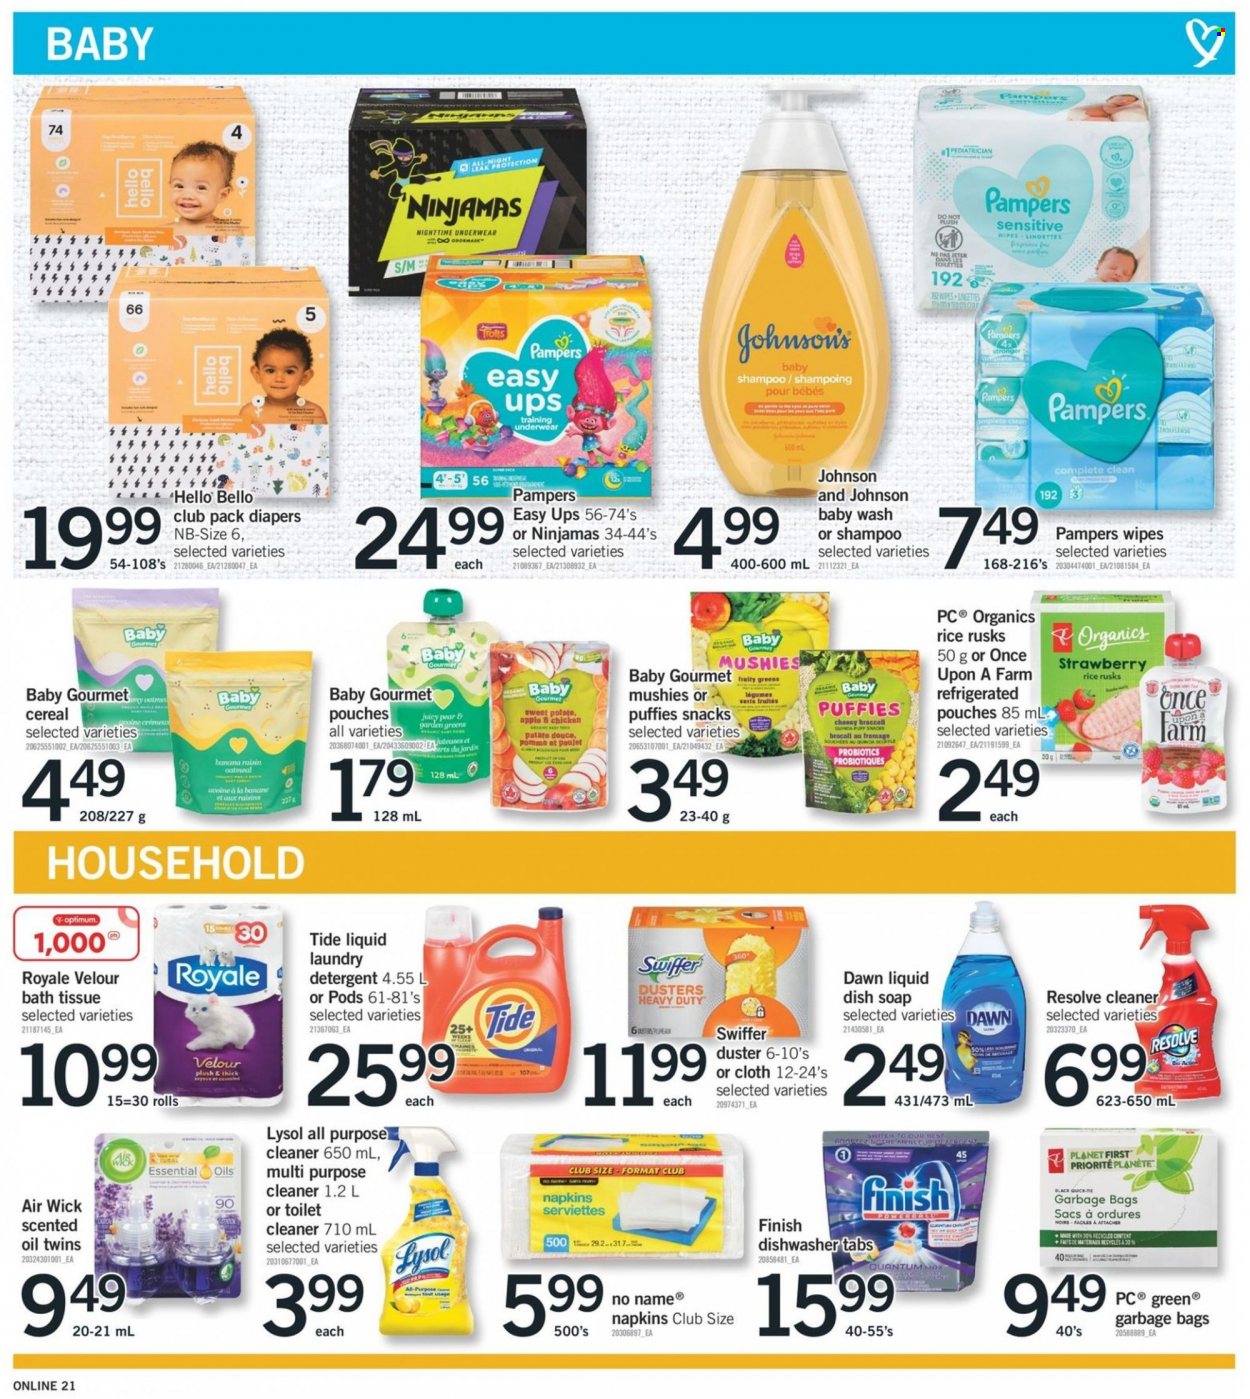 thumbnail - Fortinos Flyer - January 26, 2023 - February 01, 2023 - Sales products - rusks, broccoli, sweet potato, No Name, snack, oatmeal, cereals, dried fruit, switch, Ron Pelicano, wipes, Pampers, nappies, napkins, Johnson's, bath tissue, cleaner, all purpose cleaner, Lysol, Swiffer, Tide, laundry detergent, soap, bag, duster, pan, Air Wick, scented oil, essential oils, Optimum, dishwasher, probiotics, detergent, raisins, shampoo. Page 20.